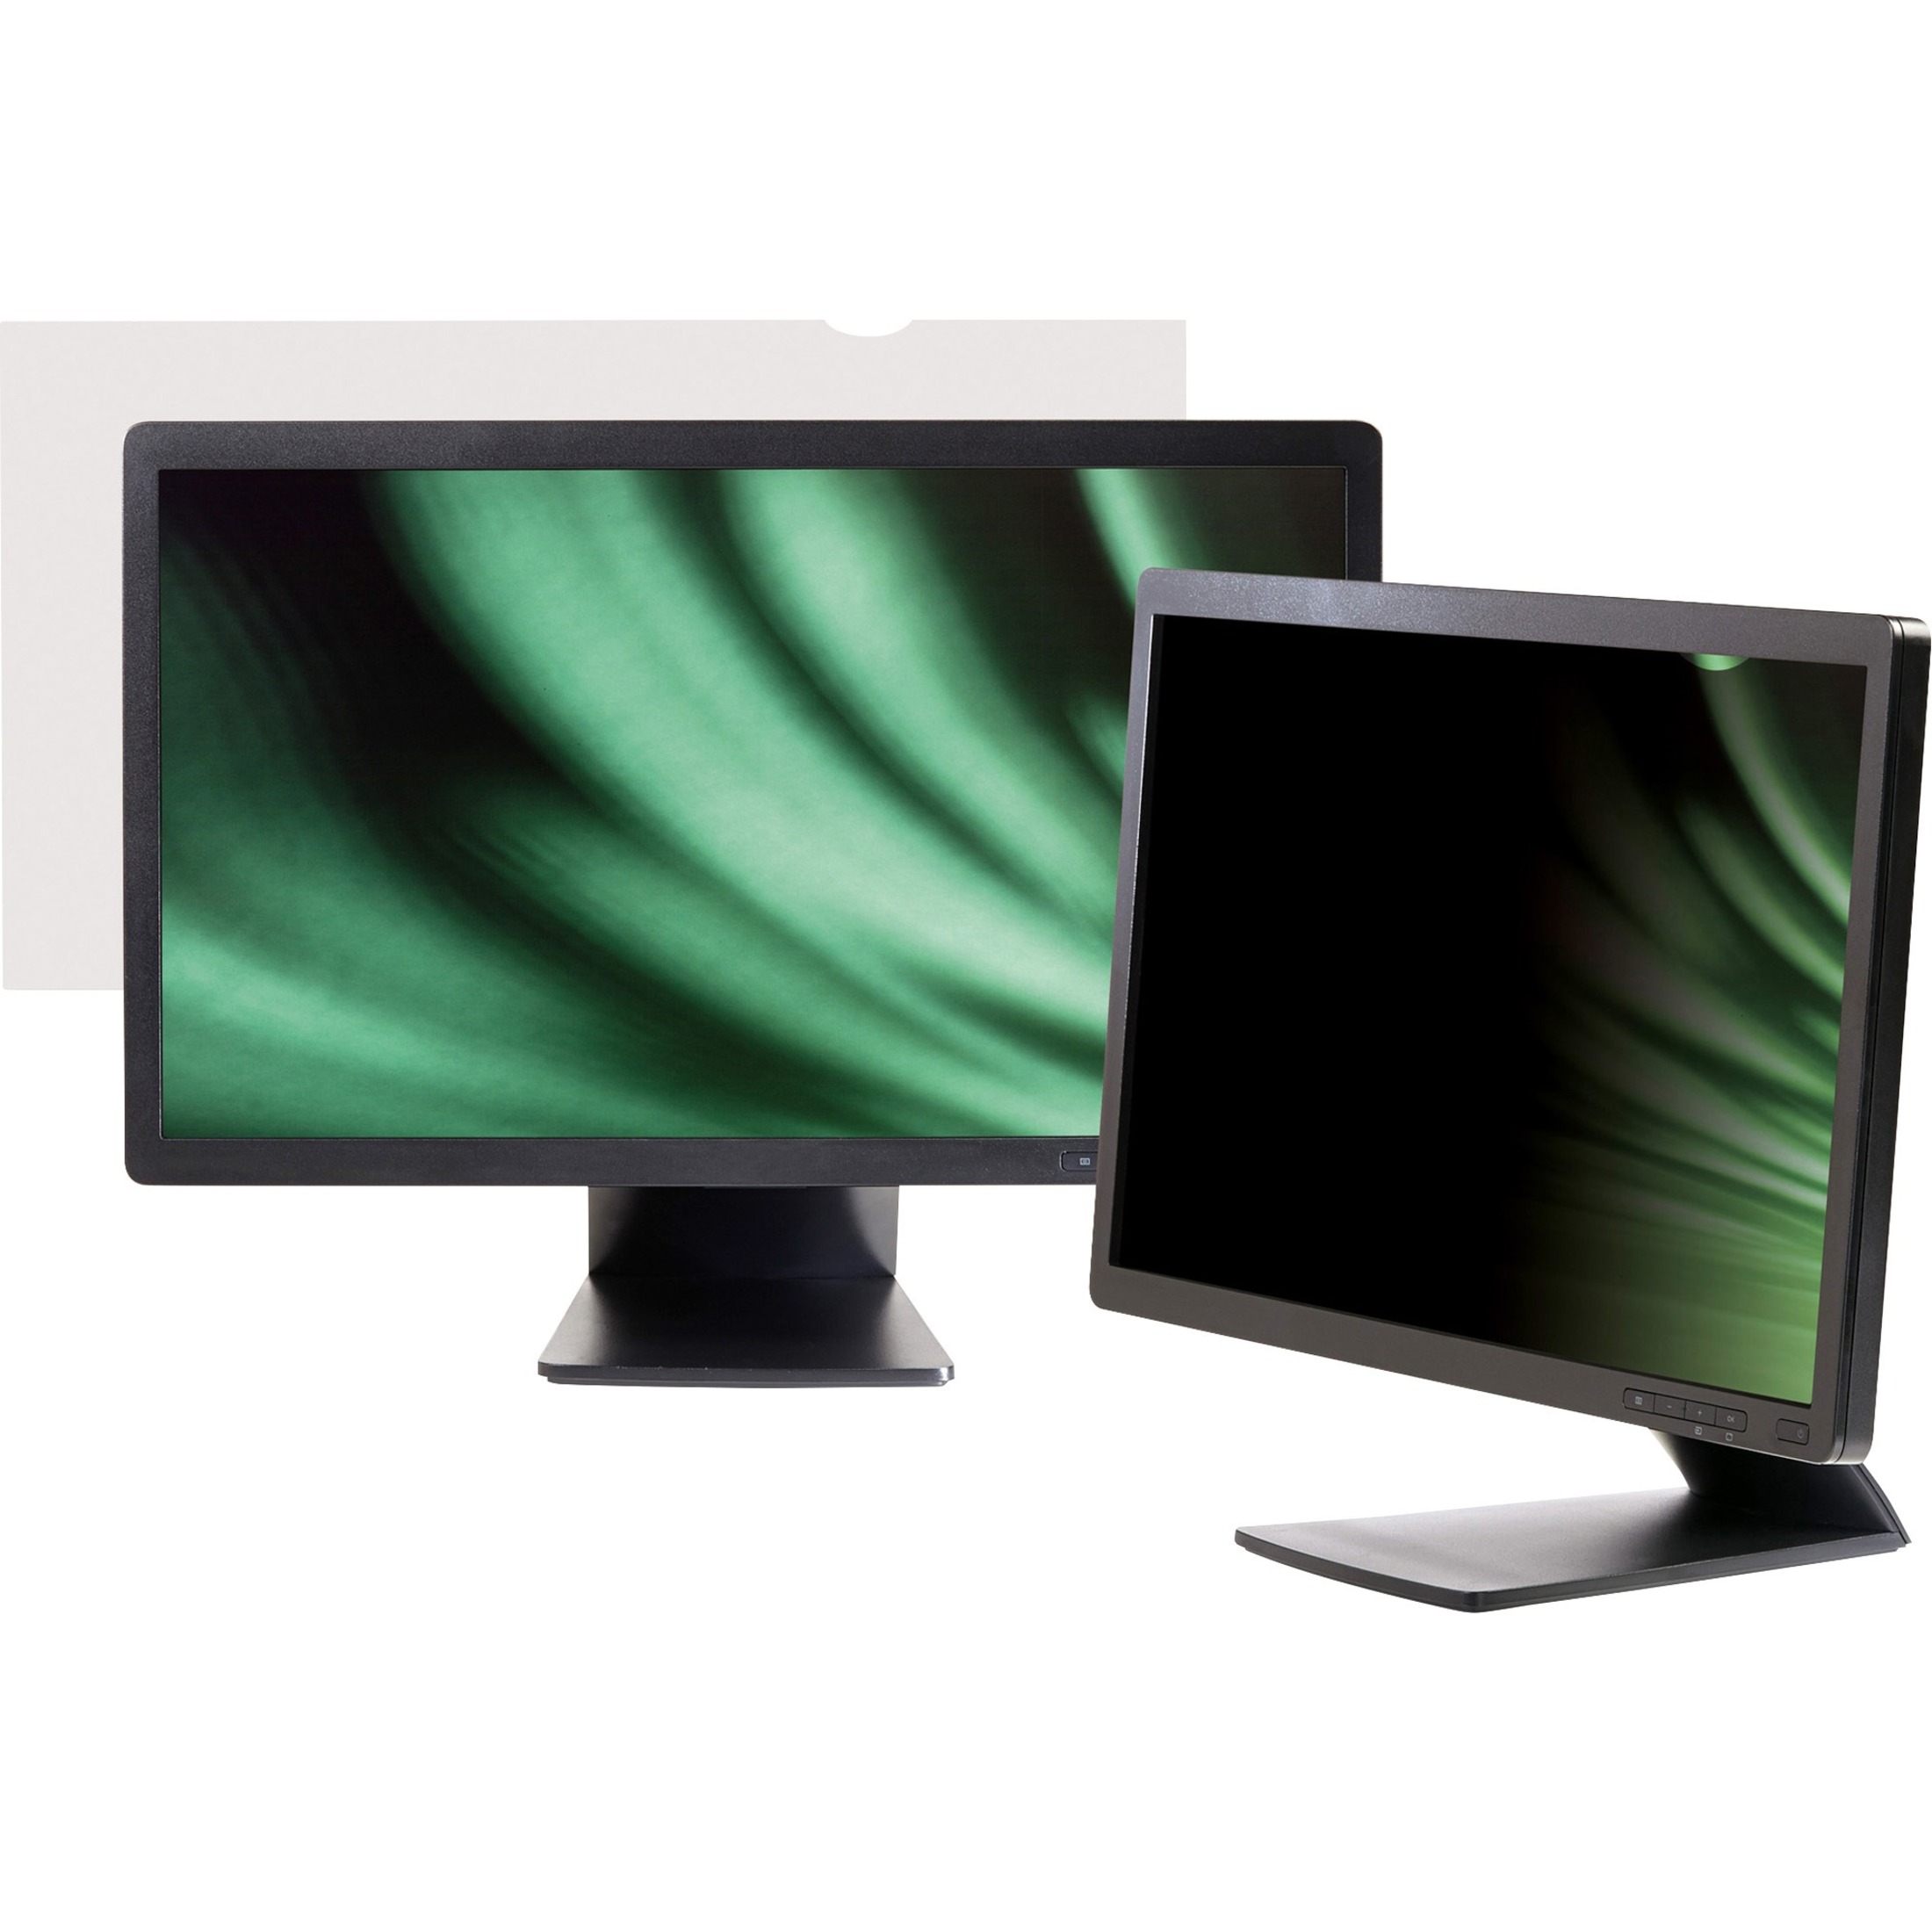 3M Privacy Filter Black, Matte, Glossy For 30" Widescreen Monitor - 16:10 - image 4 of 4